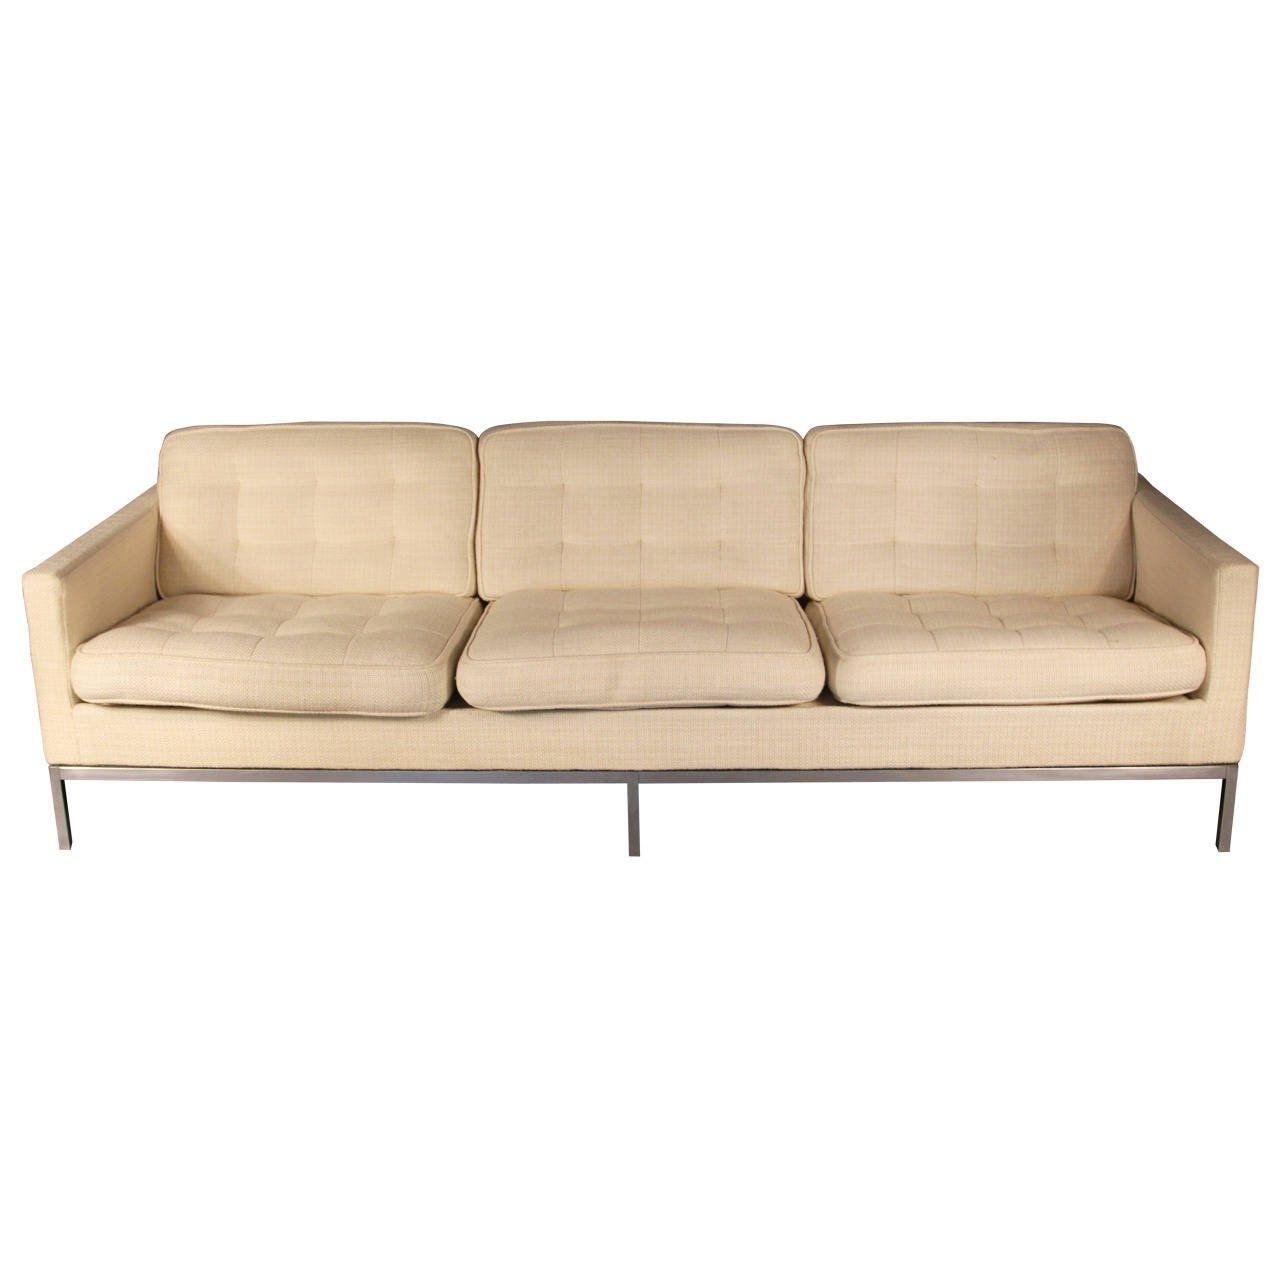 Florence Knoll Sofas – 61 For Sale At 1stdibs Regarding Current Florence Grand Sofas (View 6 of 15)